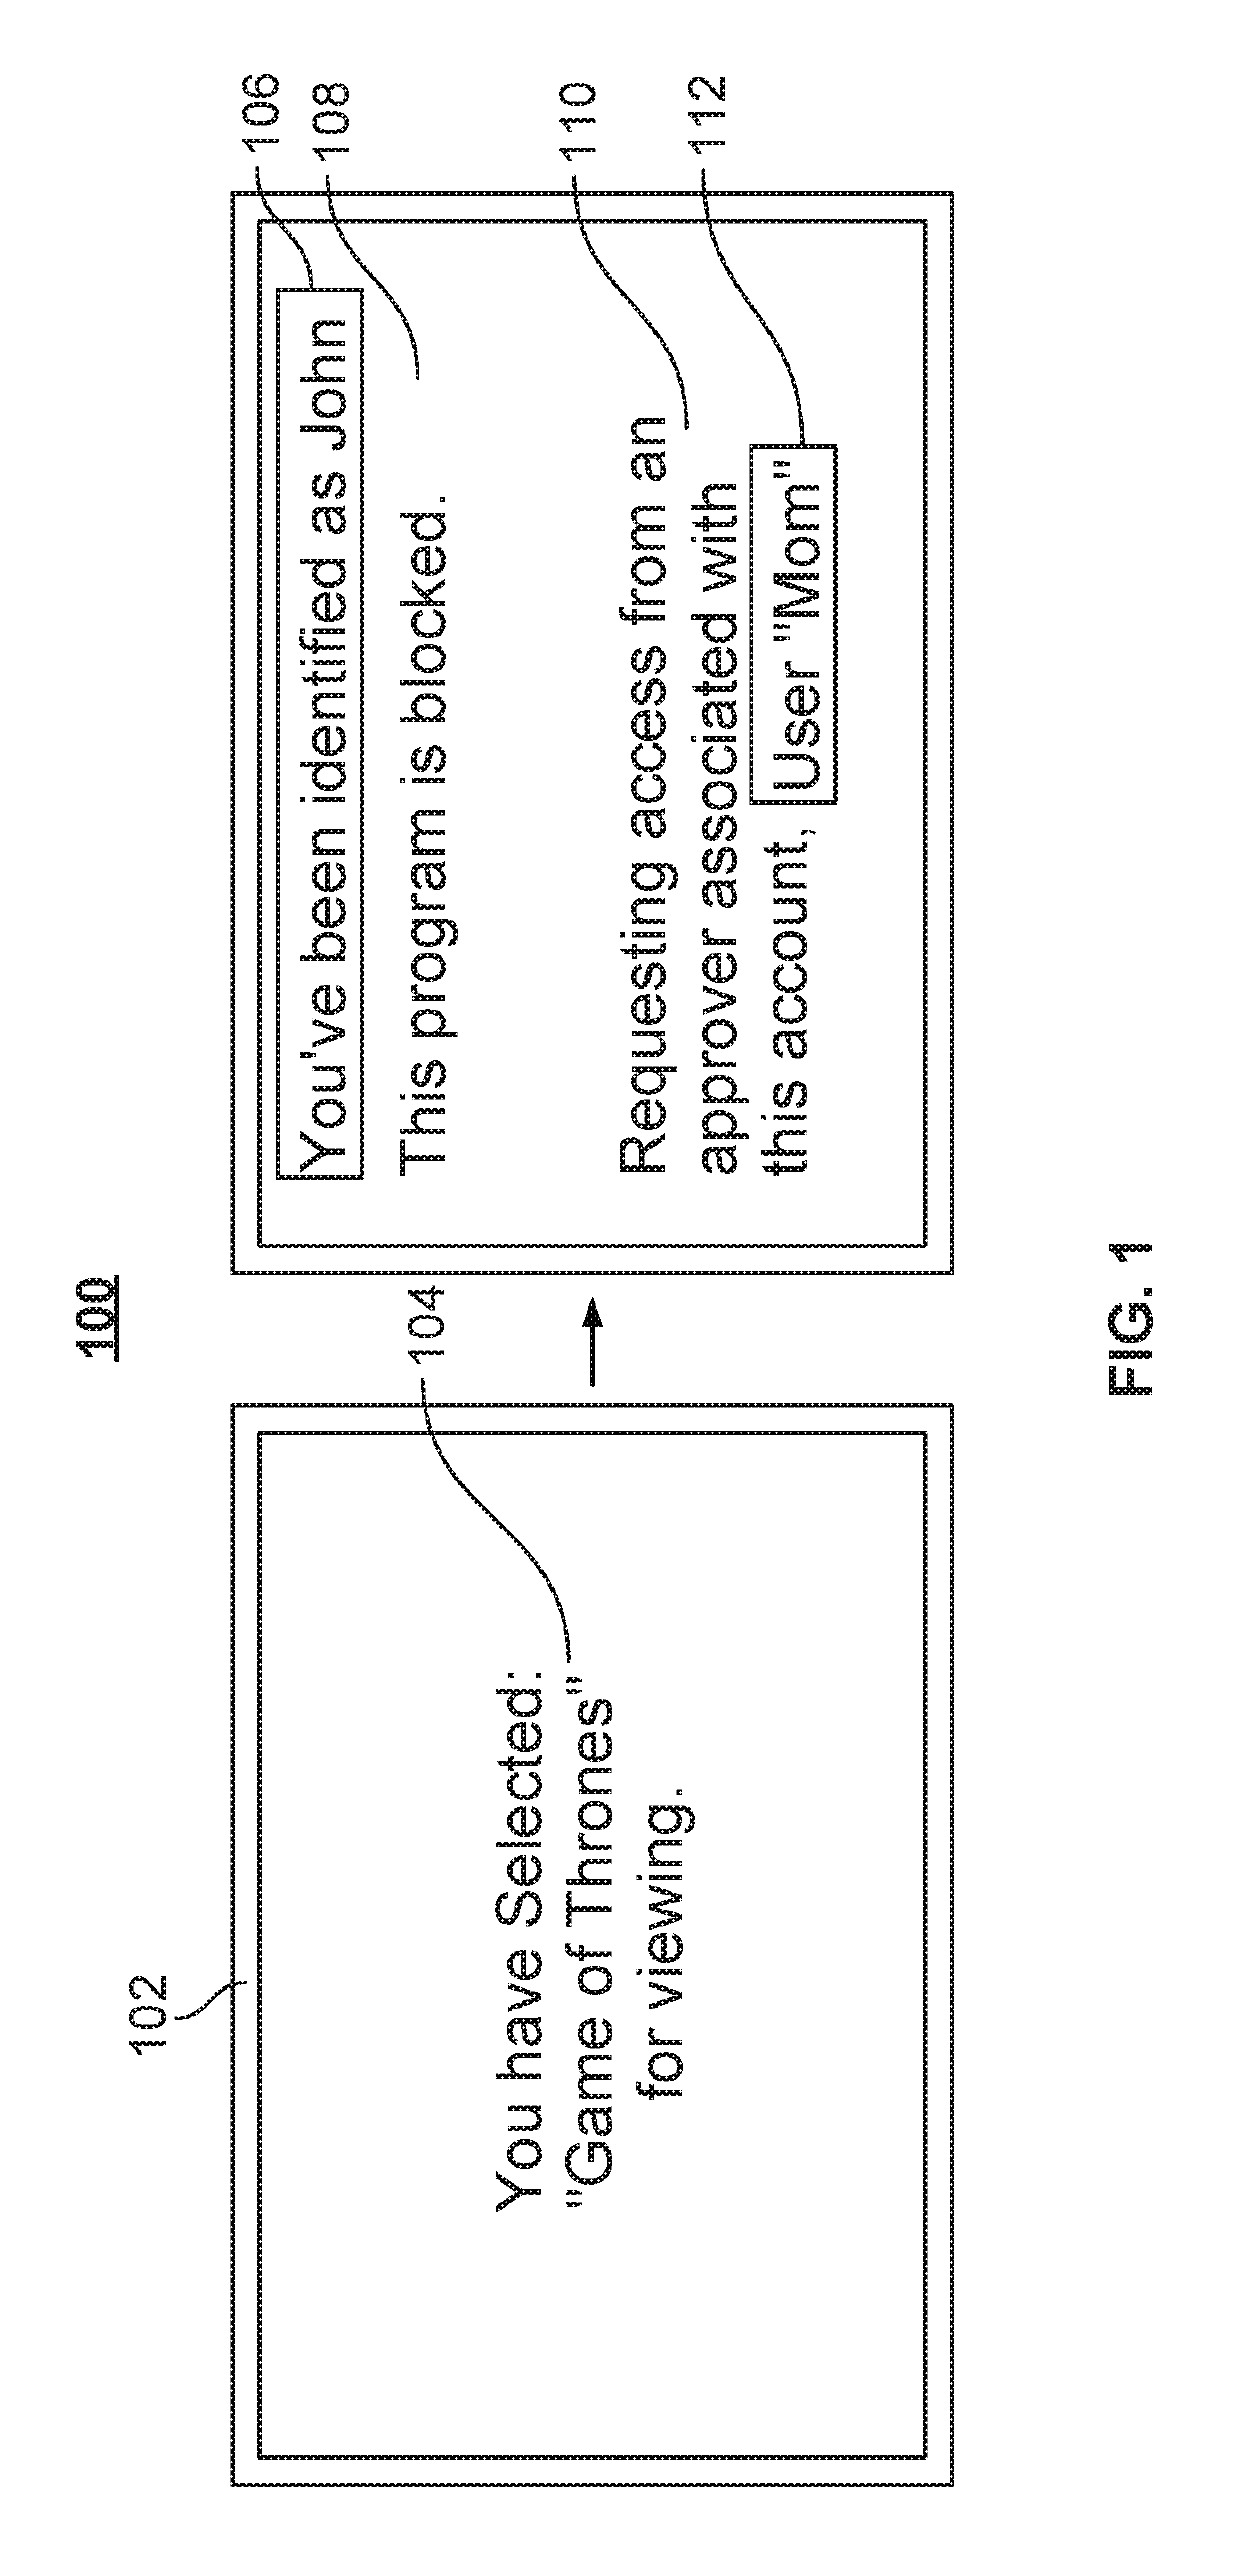 Systems and methods for allowing a user to access blocked media